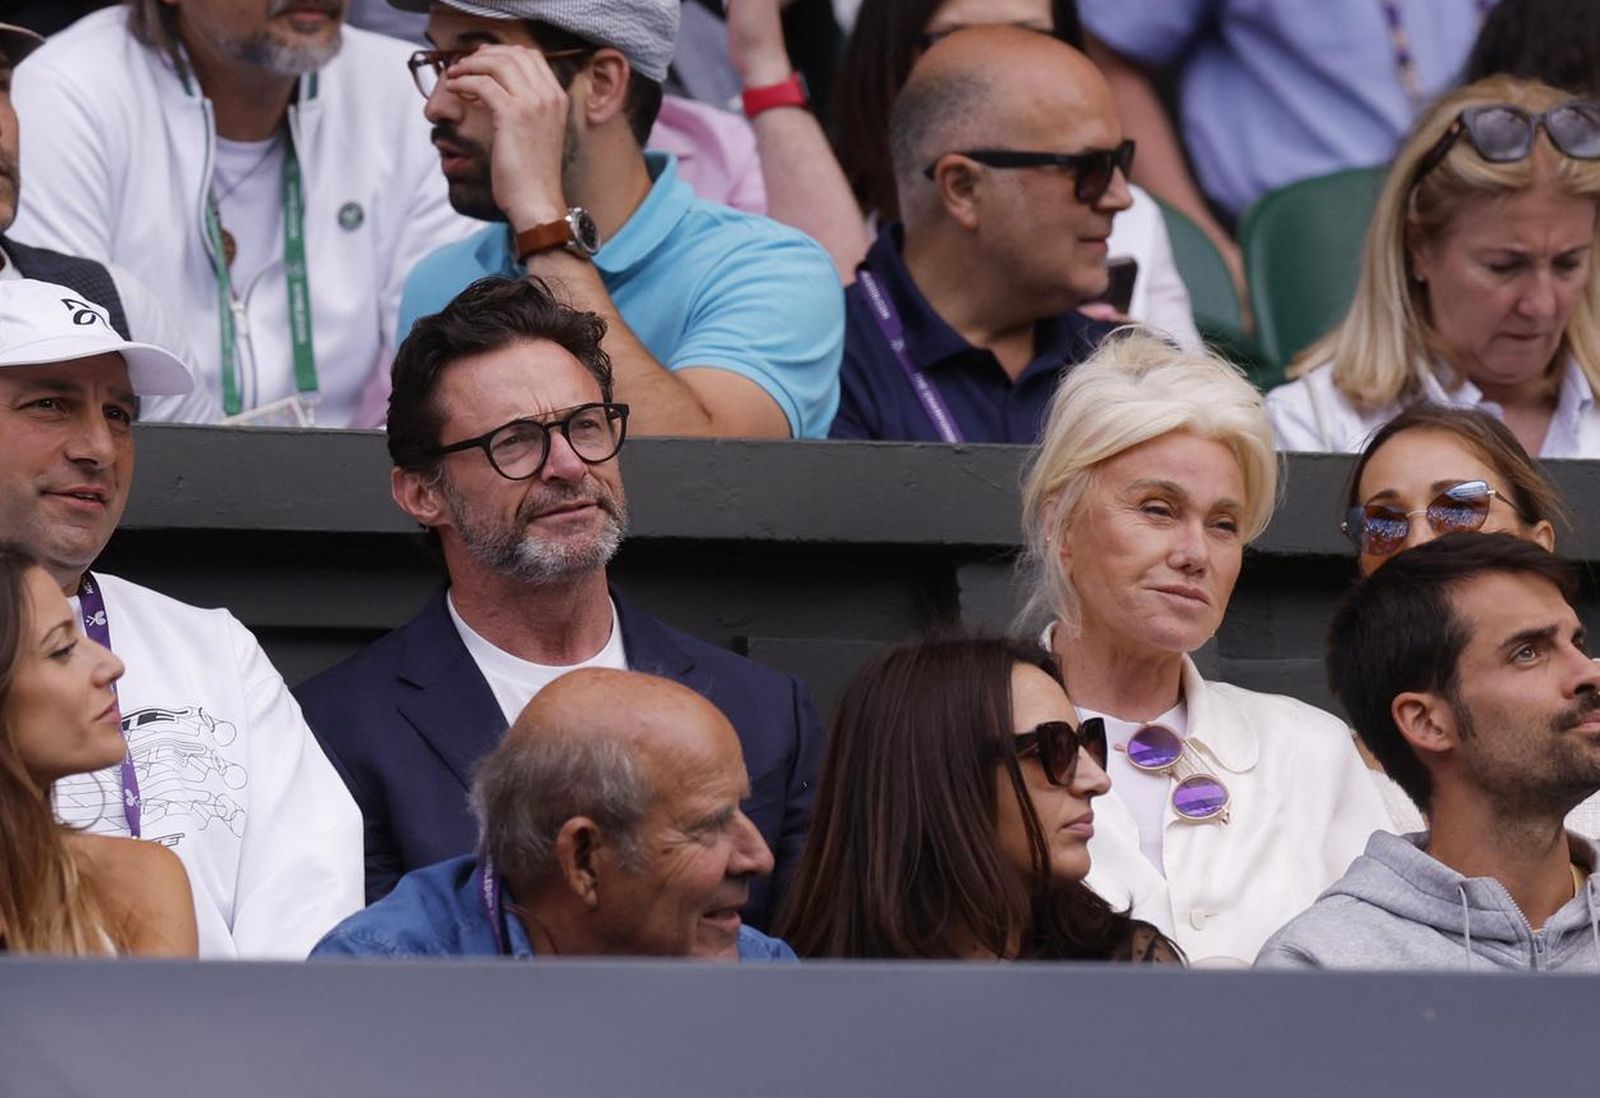 Tennis - Wimbledon - All England Lawn Tennis and Croquet Club, London, Britain - July 16, 2023 Actor Hugh Jackman and wife Deborra-Lee Furness in the stands during the men's singles final REUTERS/Andrew Couldridge Photo: Andrew Couldridge/REUTERS